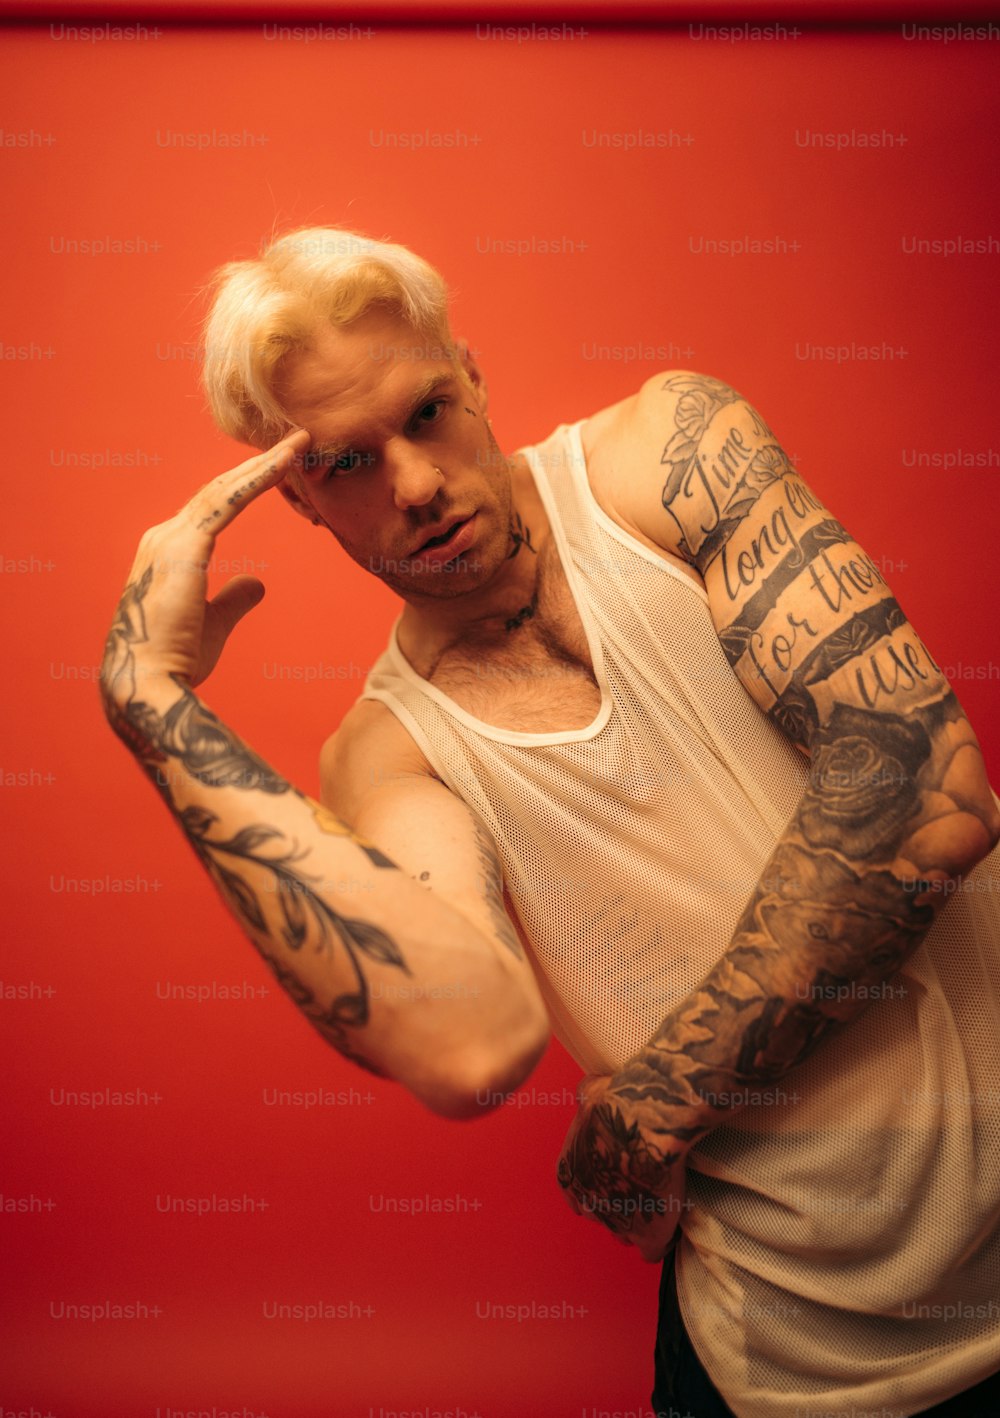 a man with white hair and tattoos on his arms